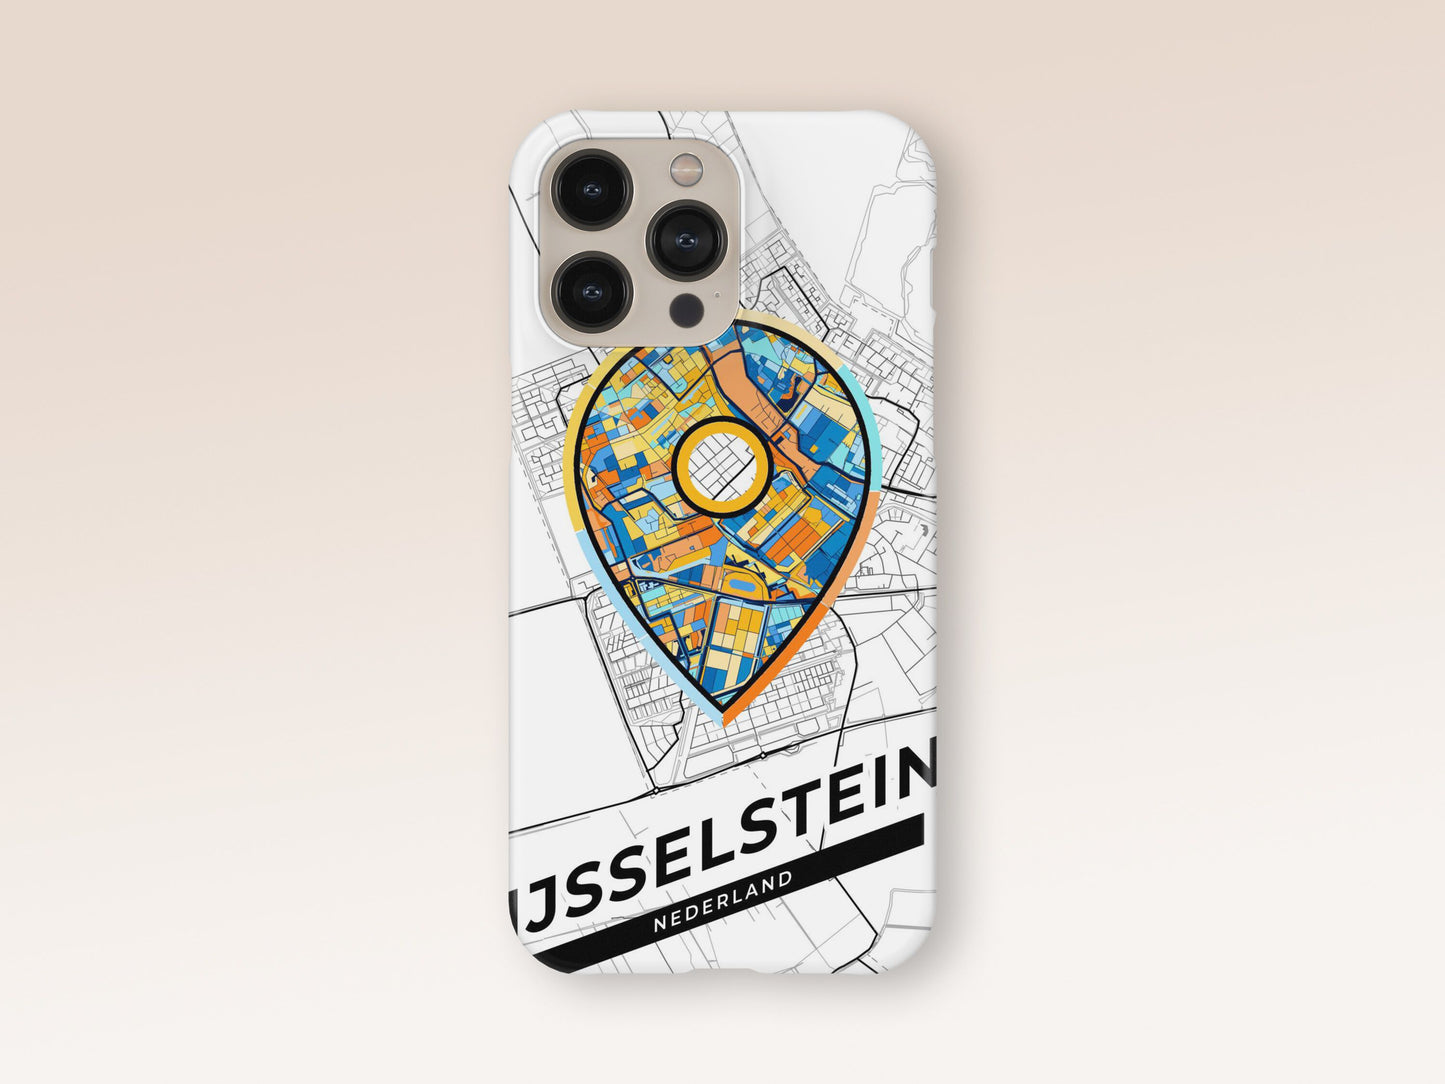 Ijsselstein Netherlands slim phone case with colorful icon. Birthday, wedding or housewarming gift. Couple match cases. 1